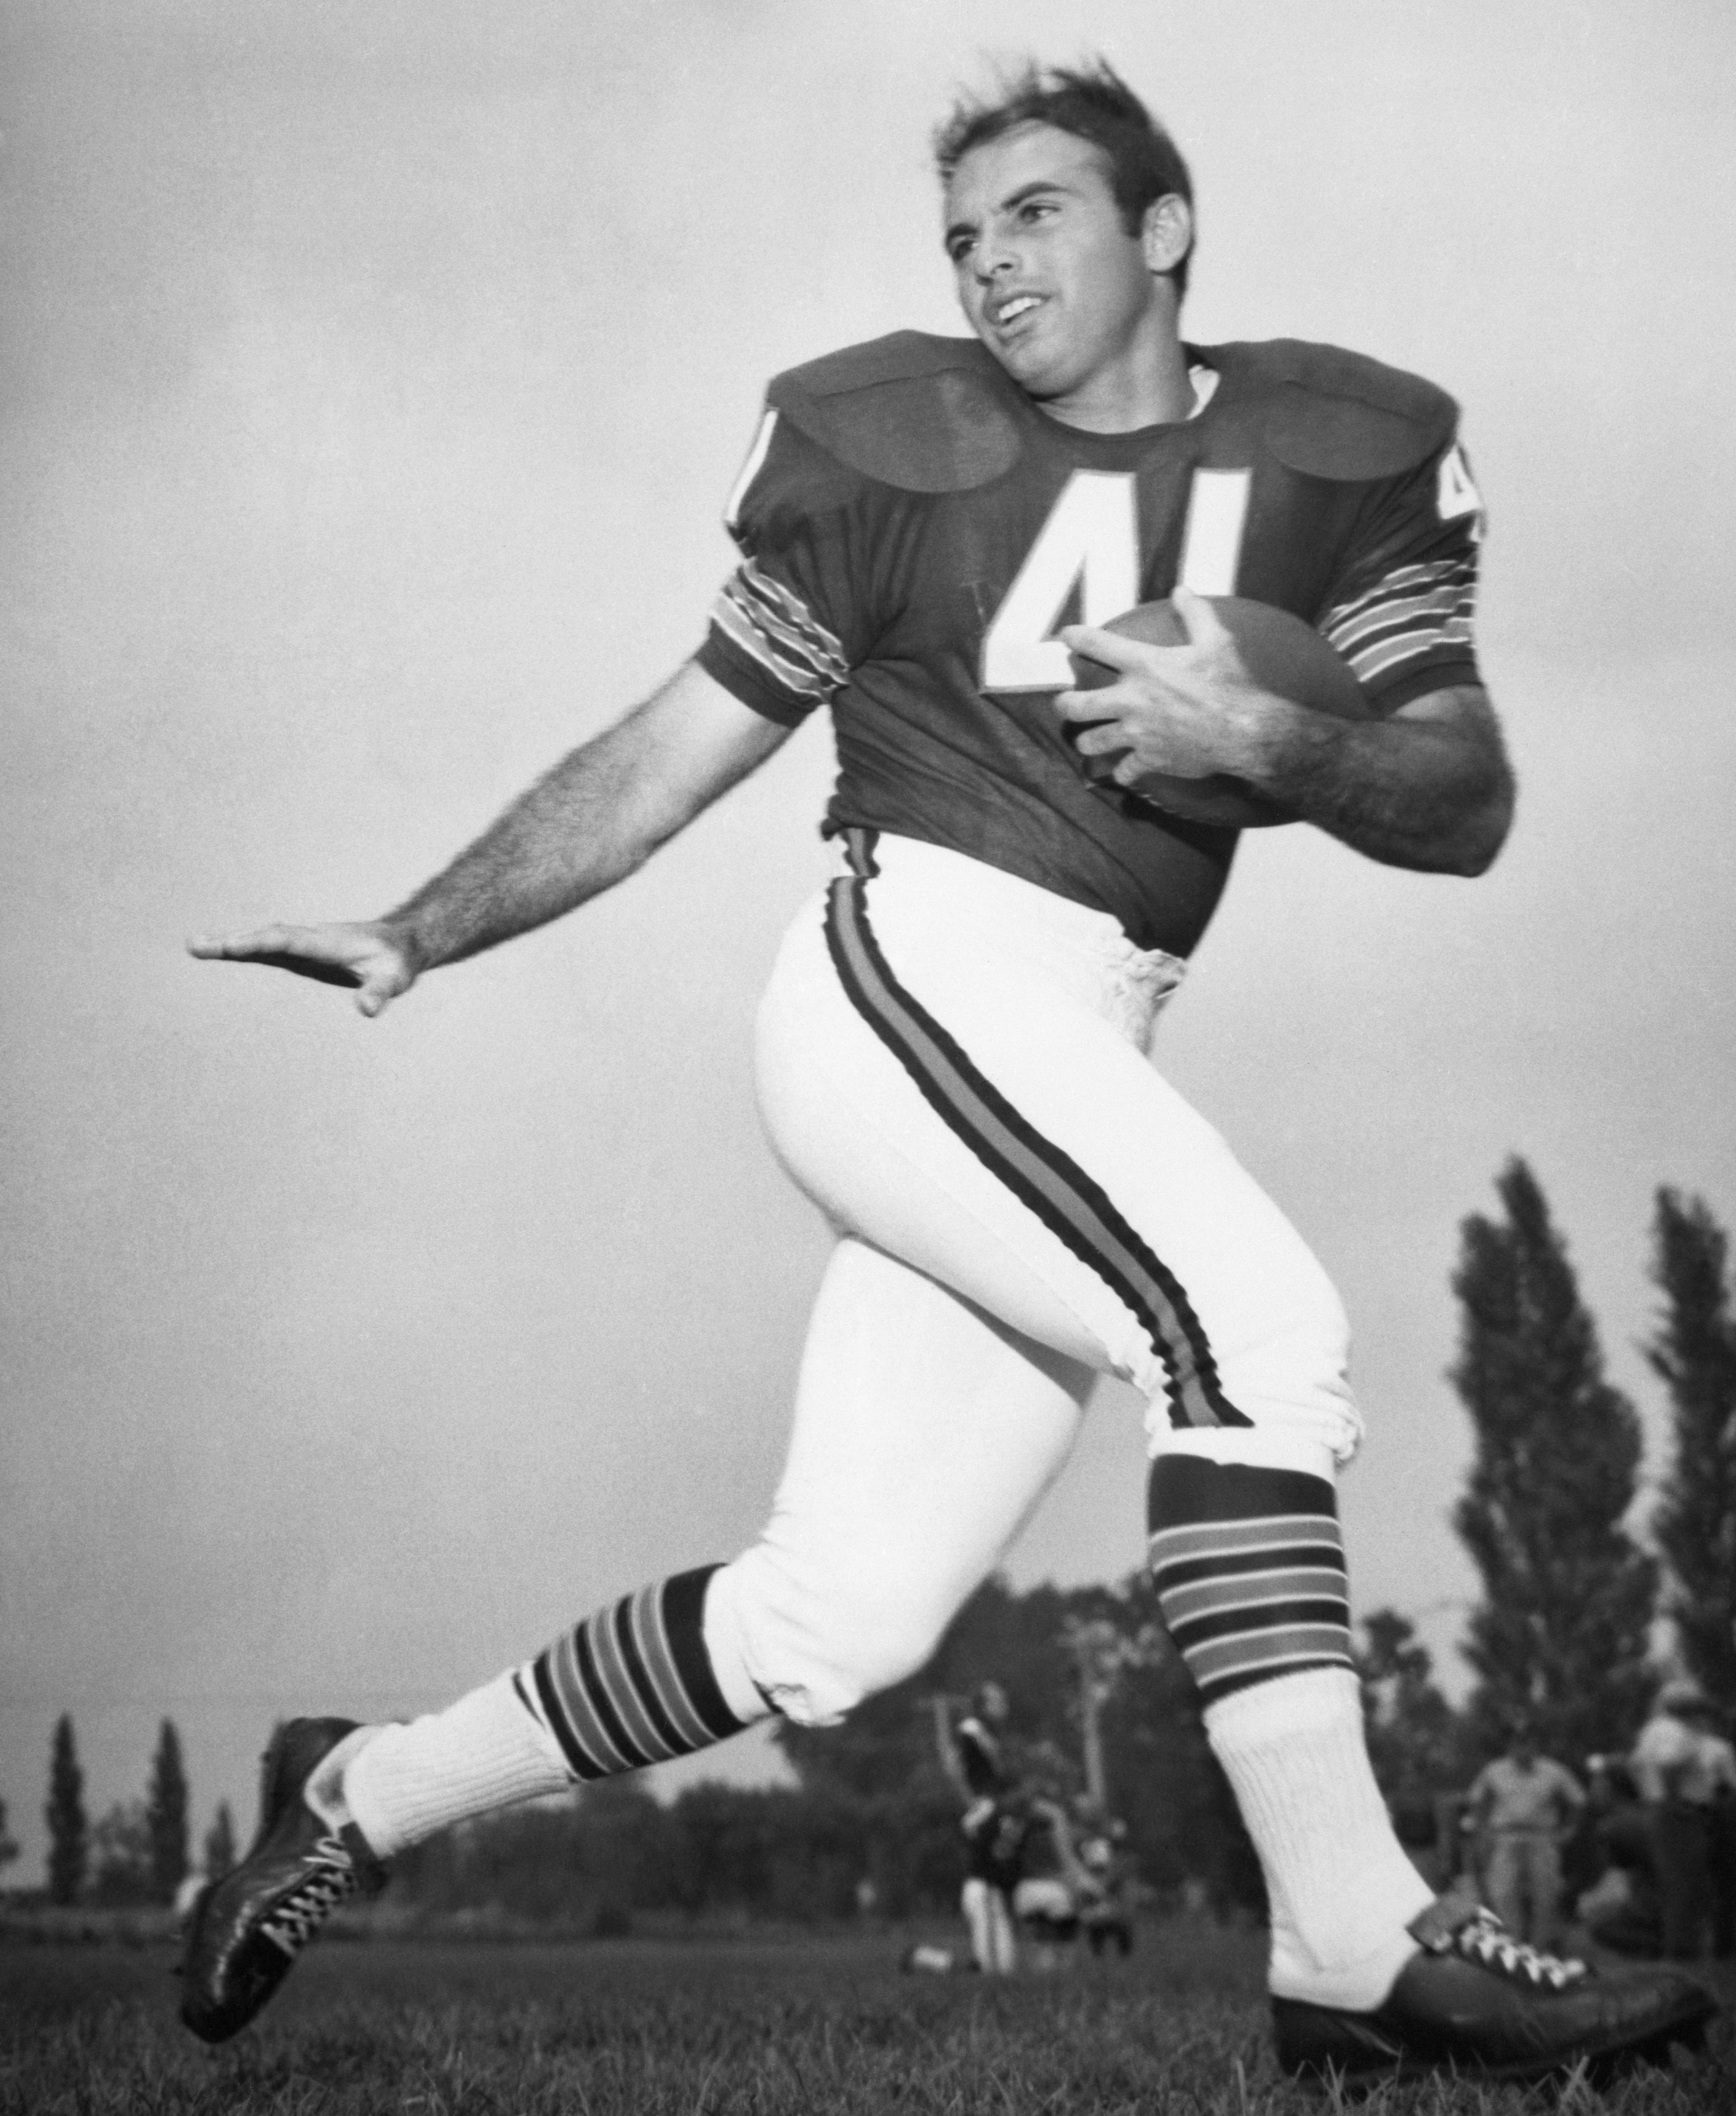 Chicago Bears Running Back Brian Piccolo